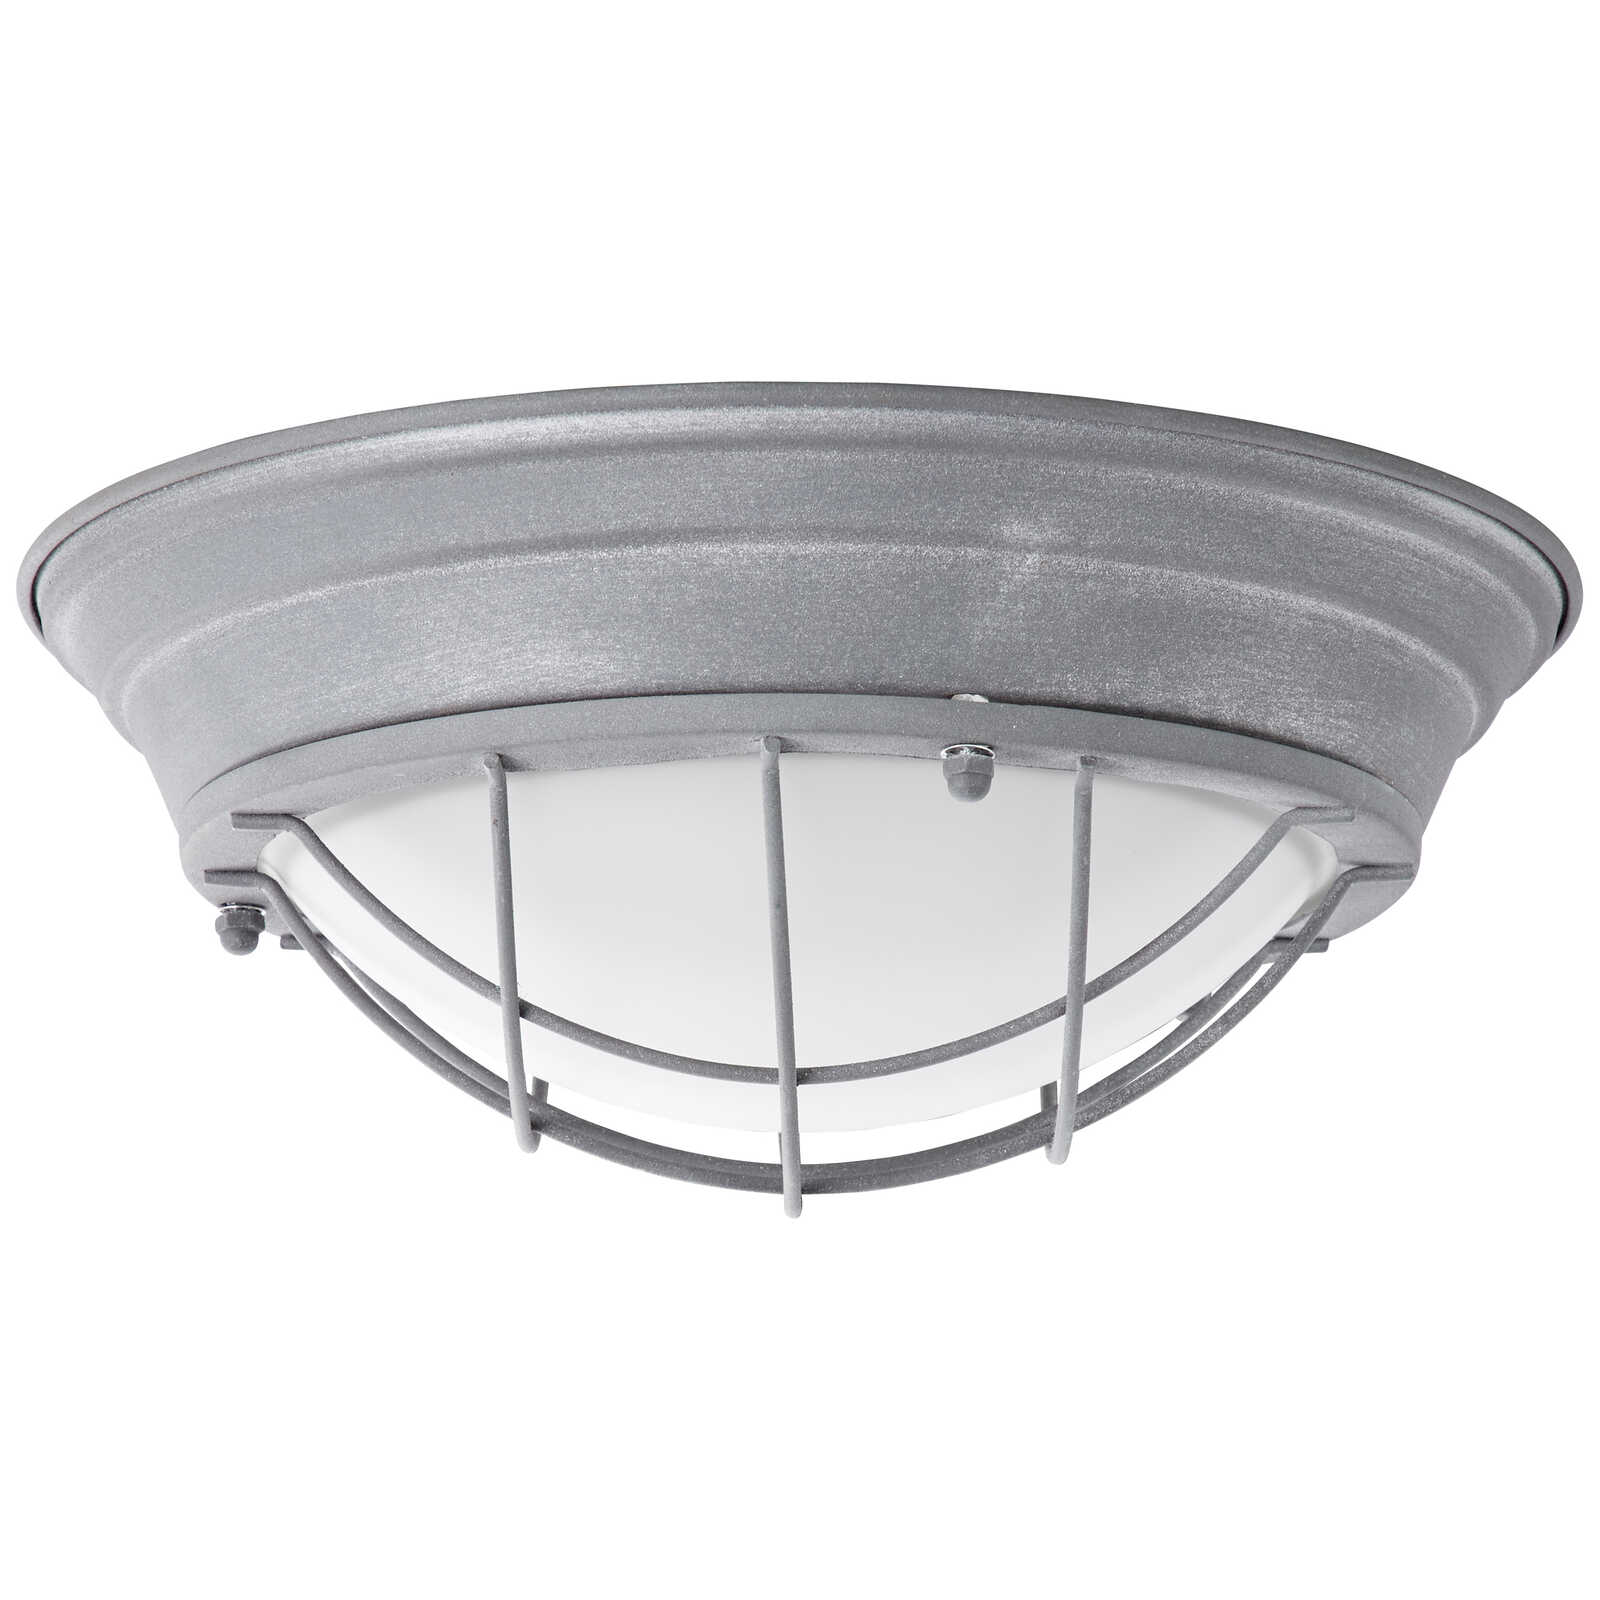             Glass wall and ceiling light - Sina 3 - Grey
        